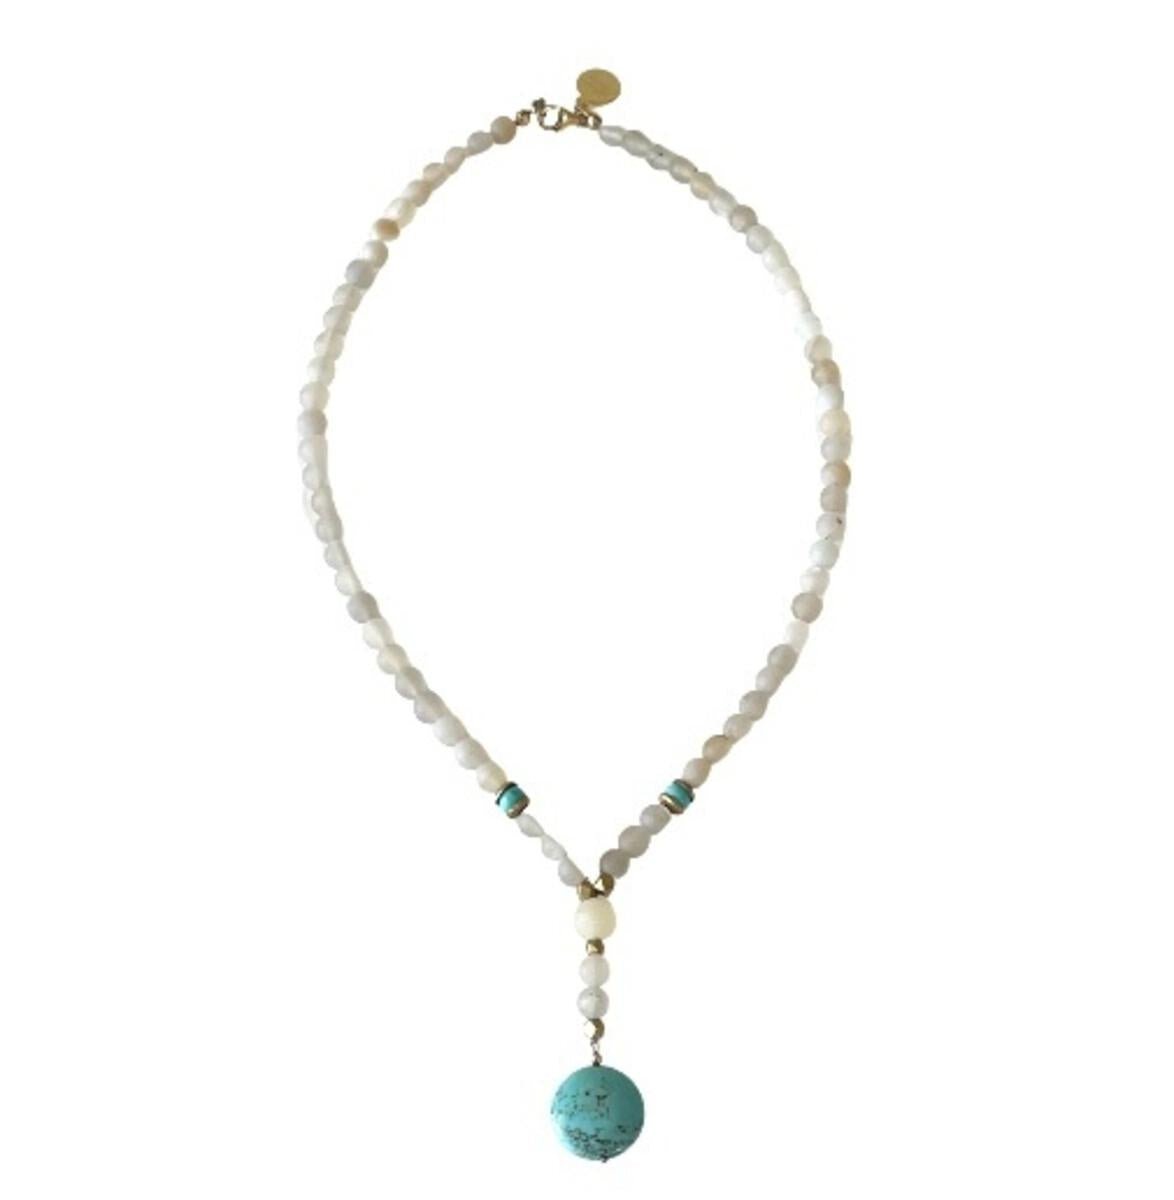 Turquoise Drop Necklace by Monica Mauro